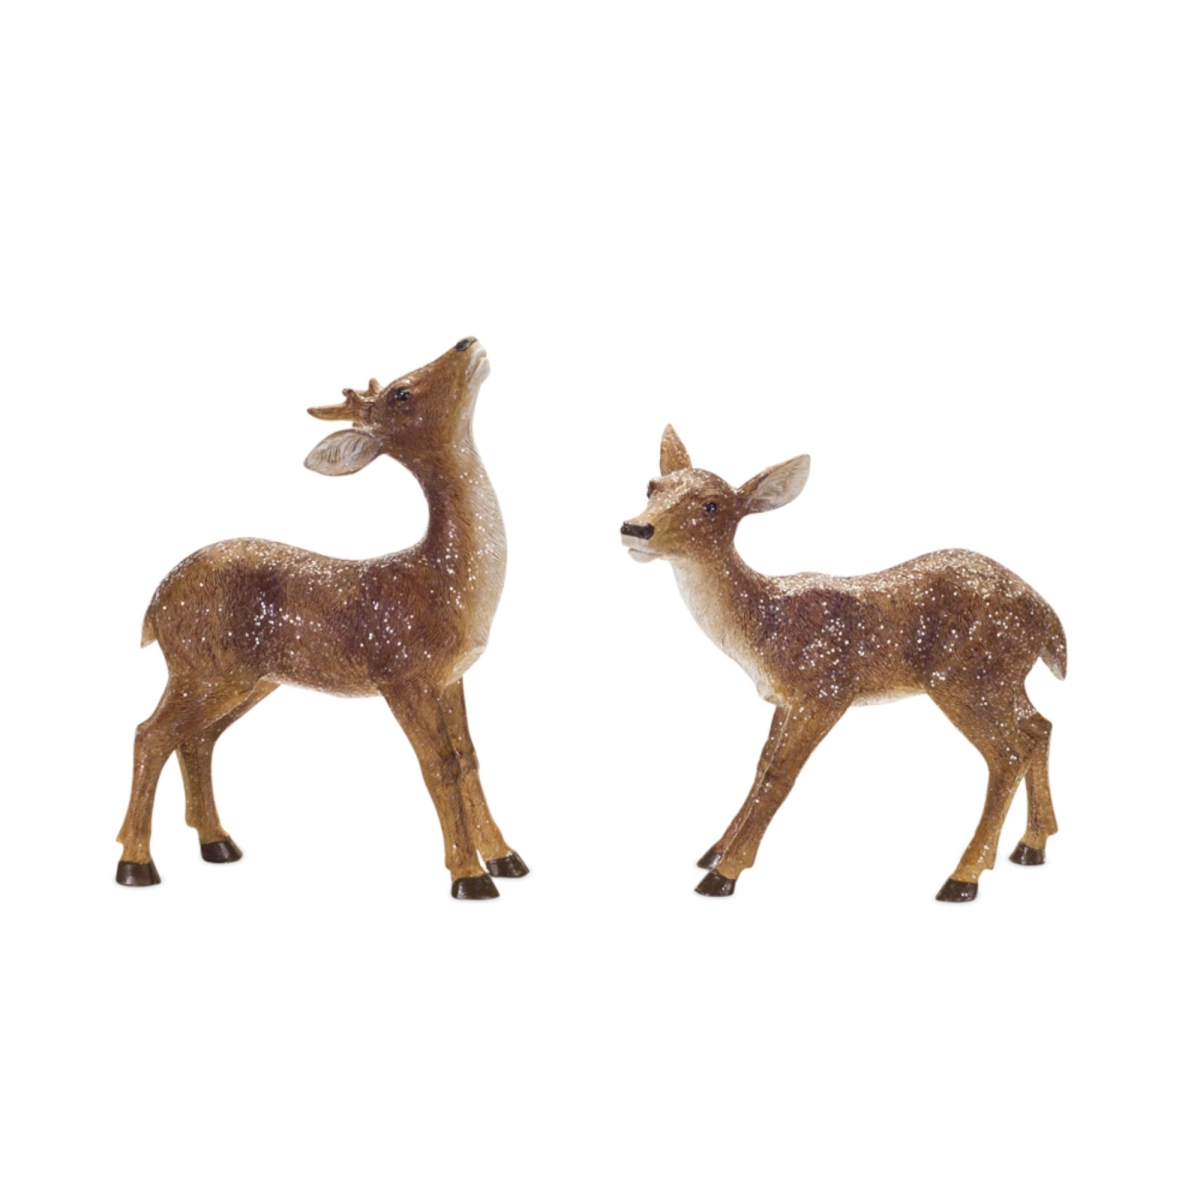 UPC 746427767903 product image for 76790DS 8 x 9.5 in. Resin Deer - Brown & White, Set of 2 | upcitemdb.com